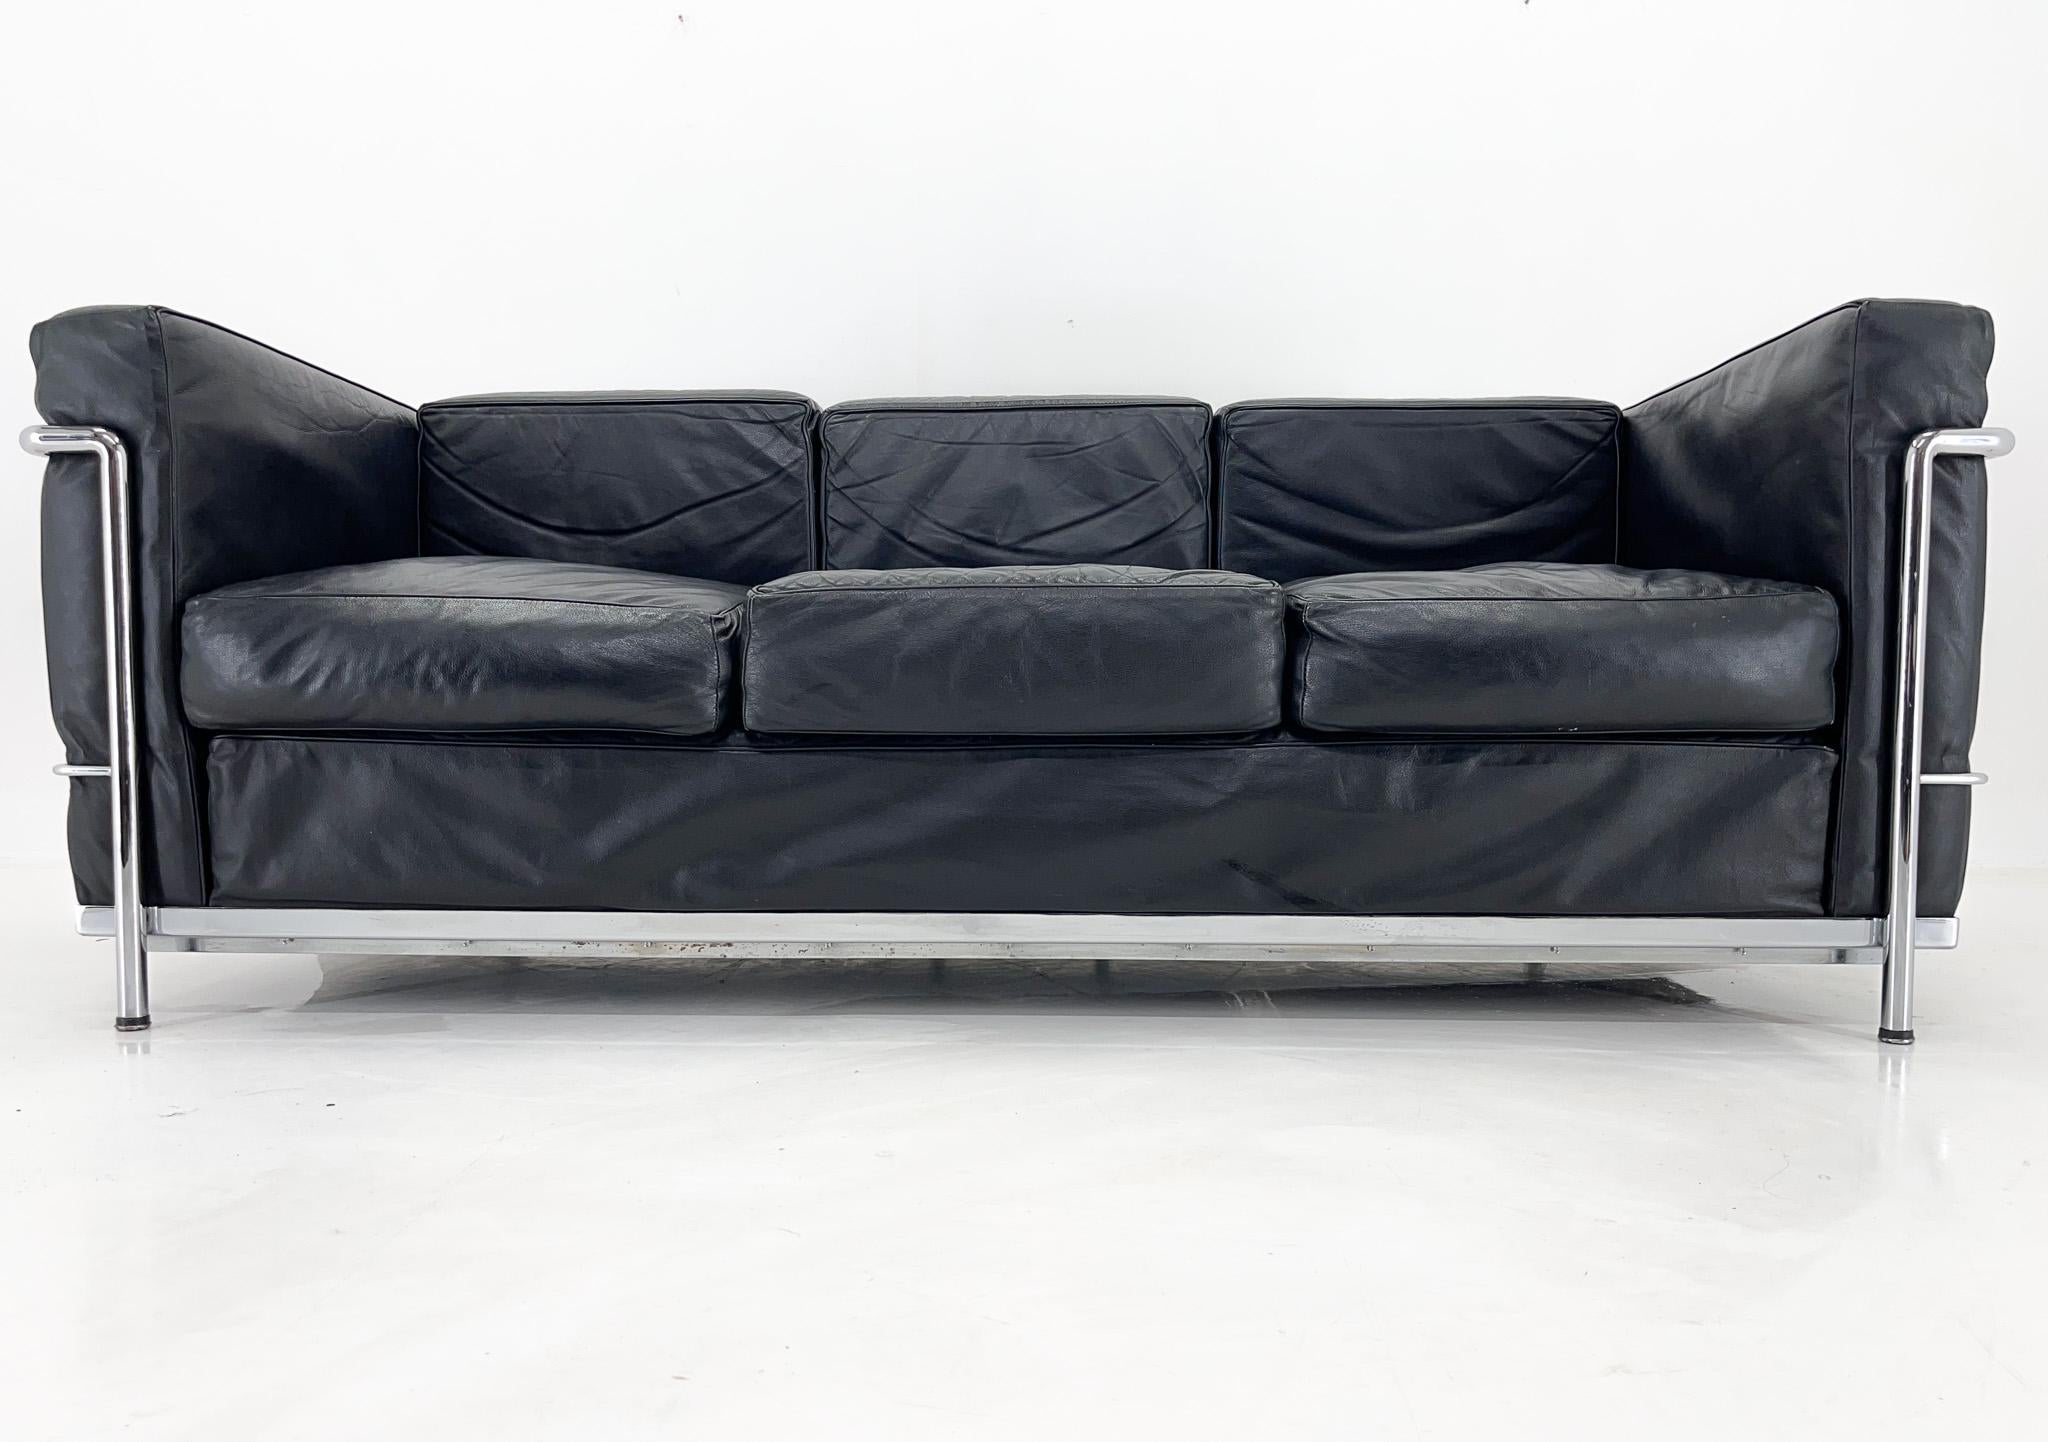 Three-seater sofa in black leather and chrome, made at the end of the 20th century. Based on the LC3 sofa designed by Le Corbusier, Pierre Jeanneret and Charlotte Perriand for Cassina. A fantastic combination of comfort and modern elegance.